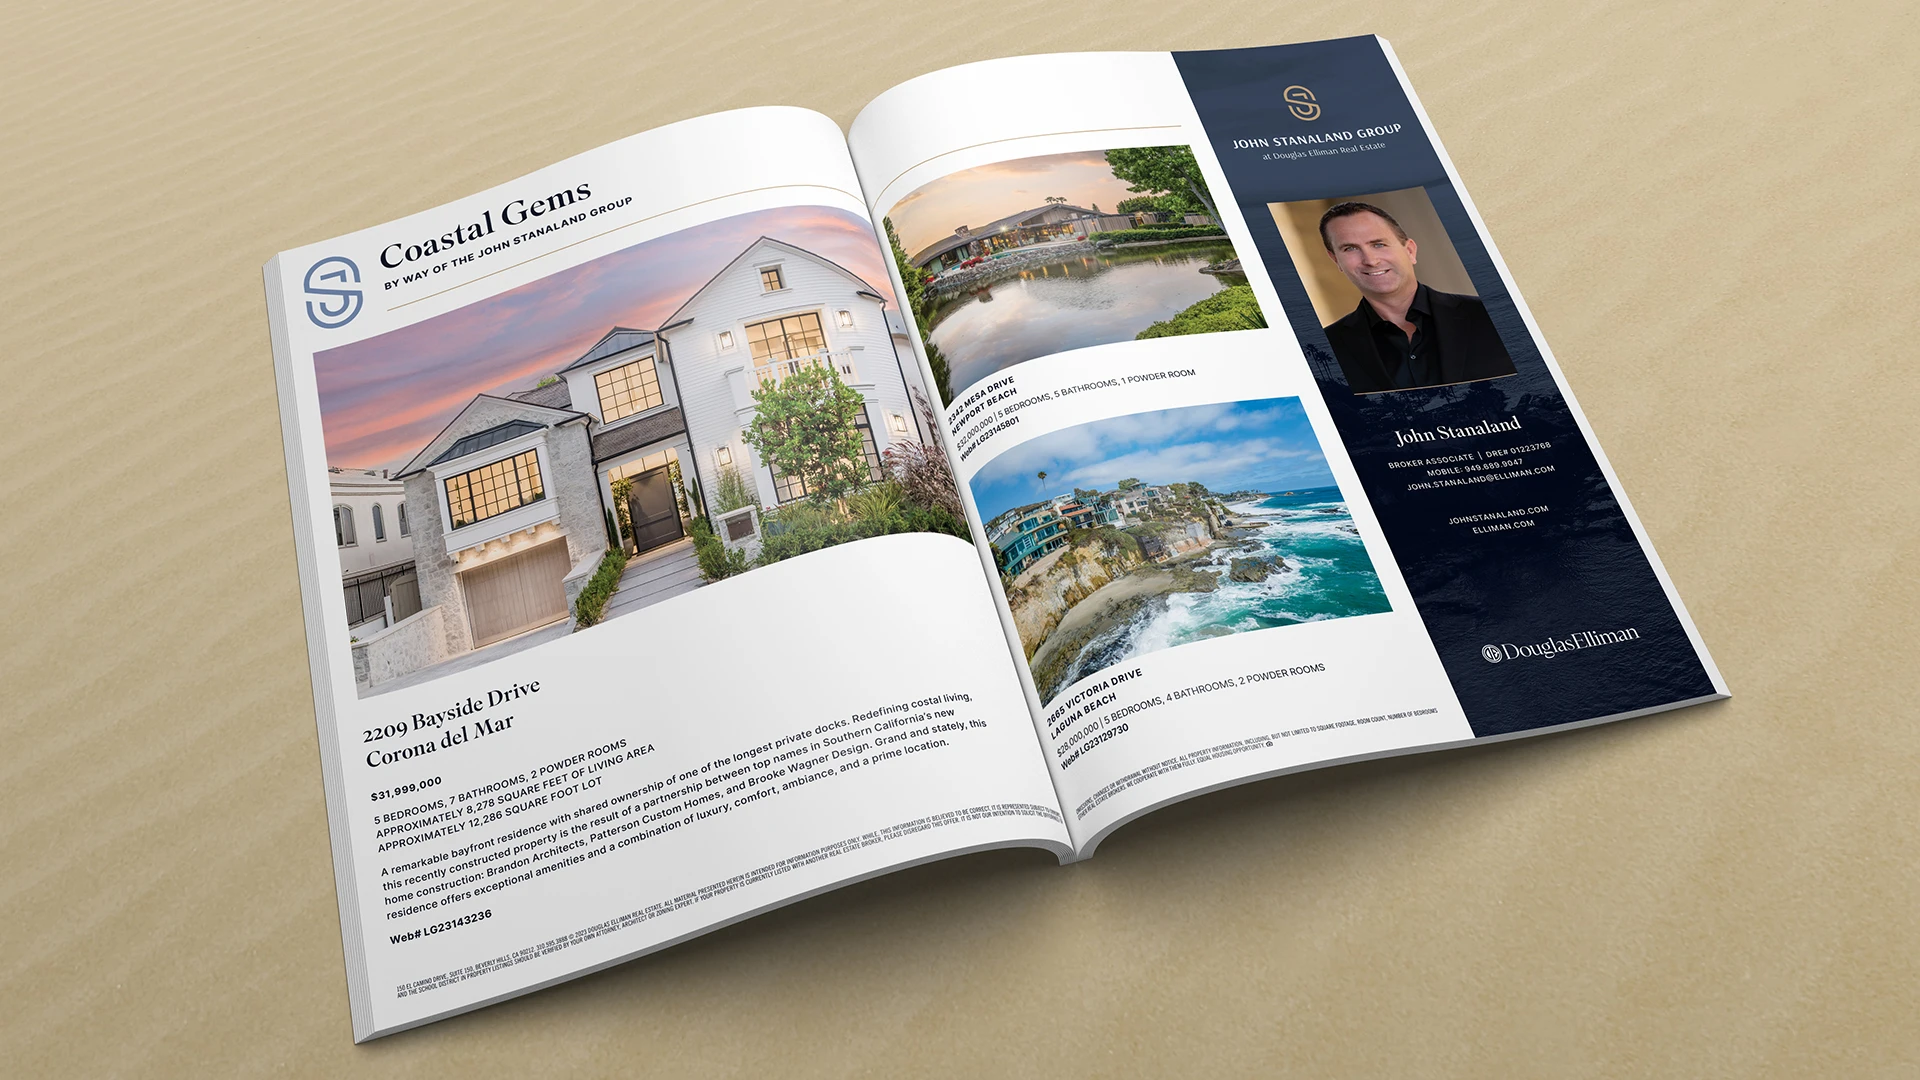 A mockup of a two-page spread multi-property advertisement for John Stanaland Group.